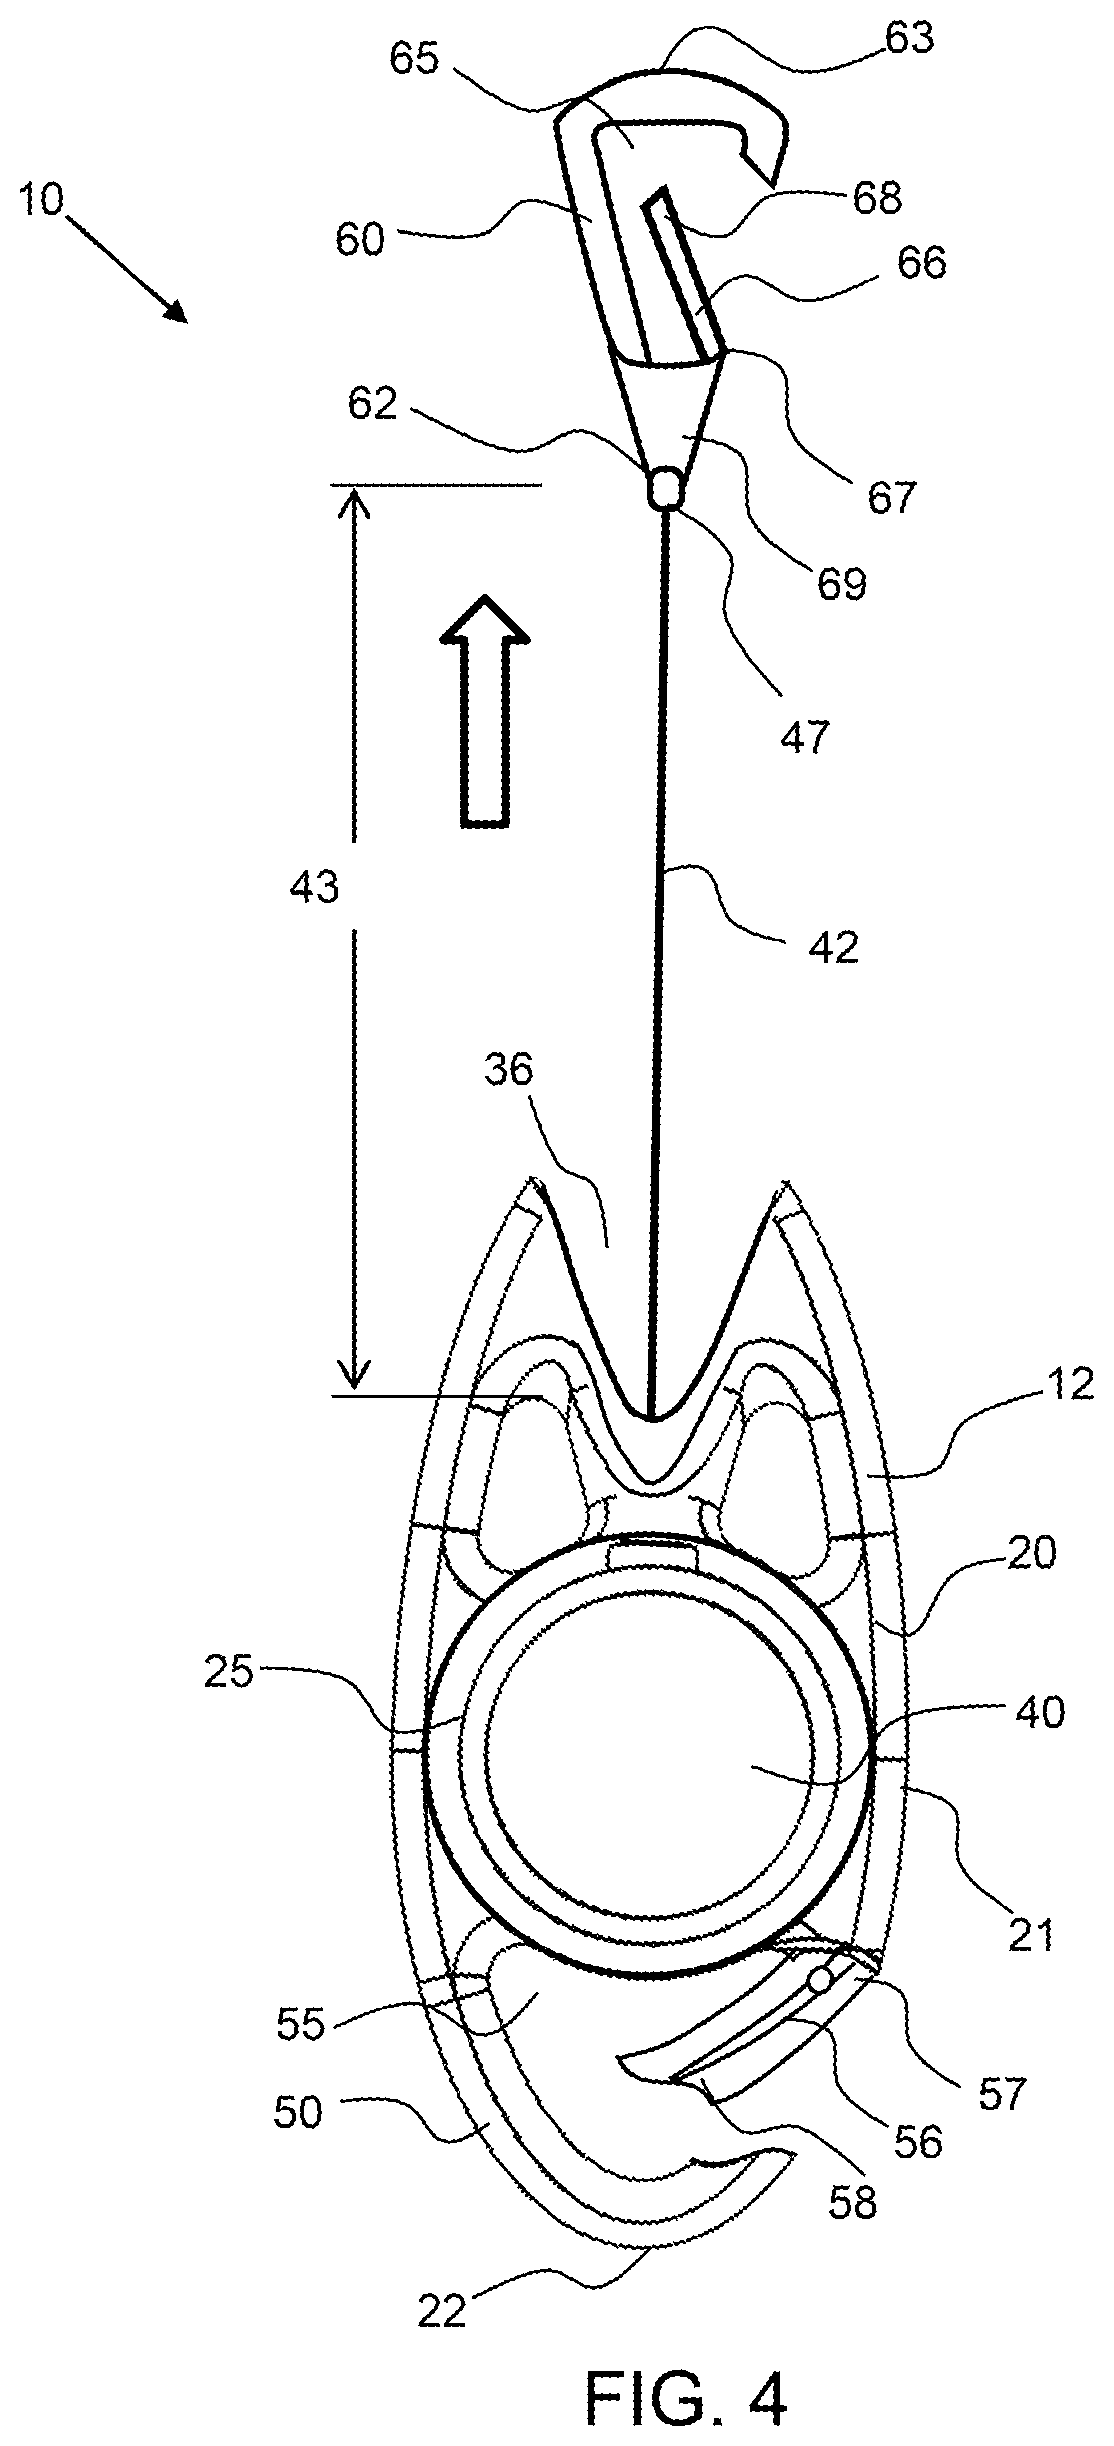 Extendable and retractable coupling system